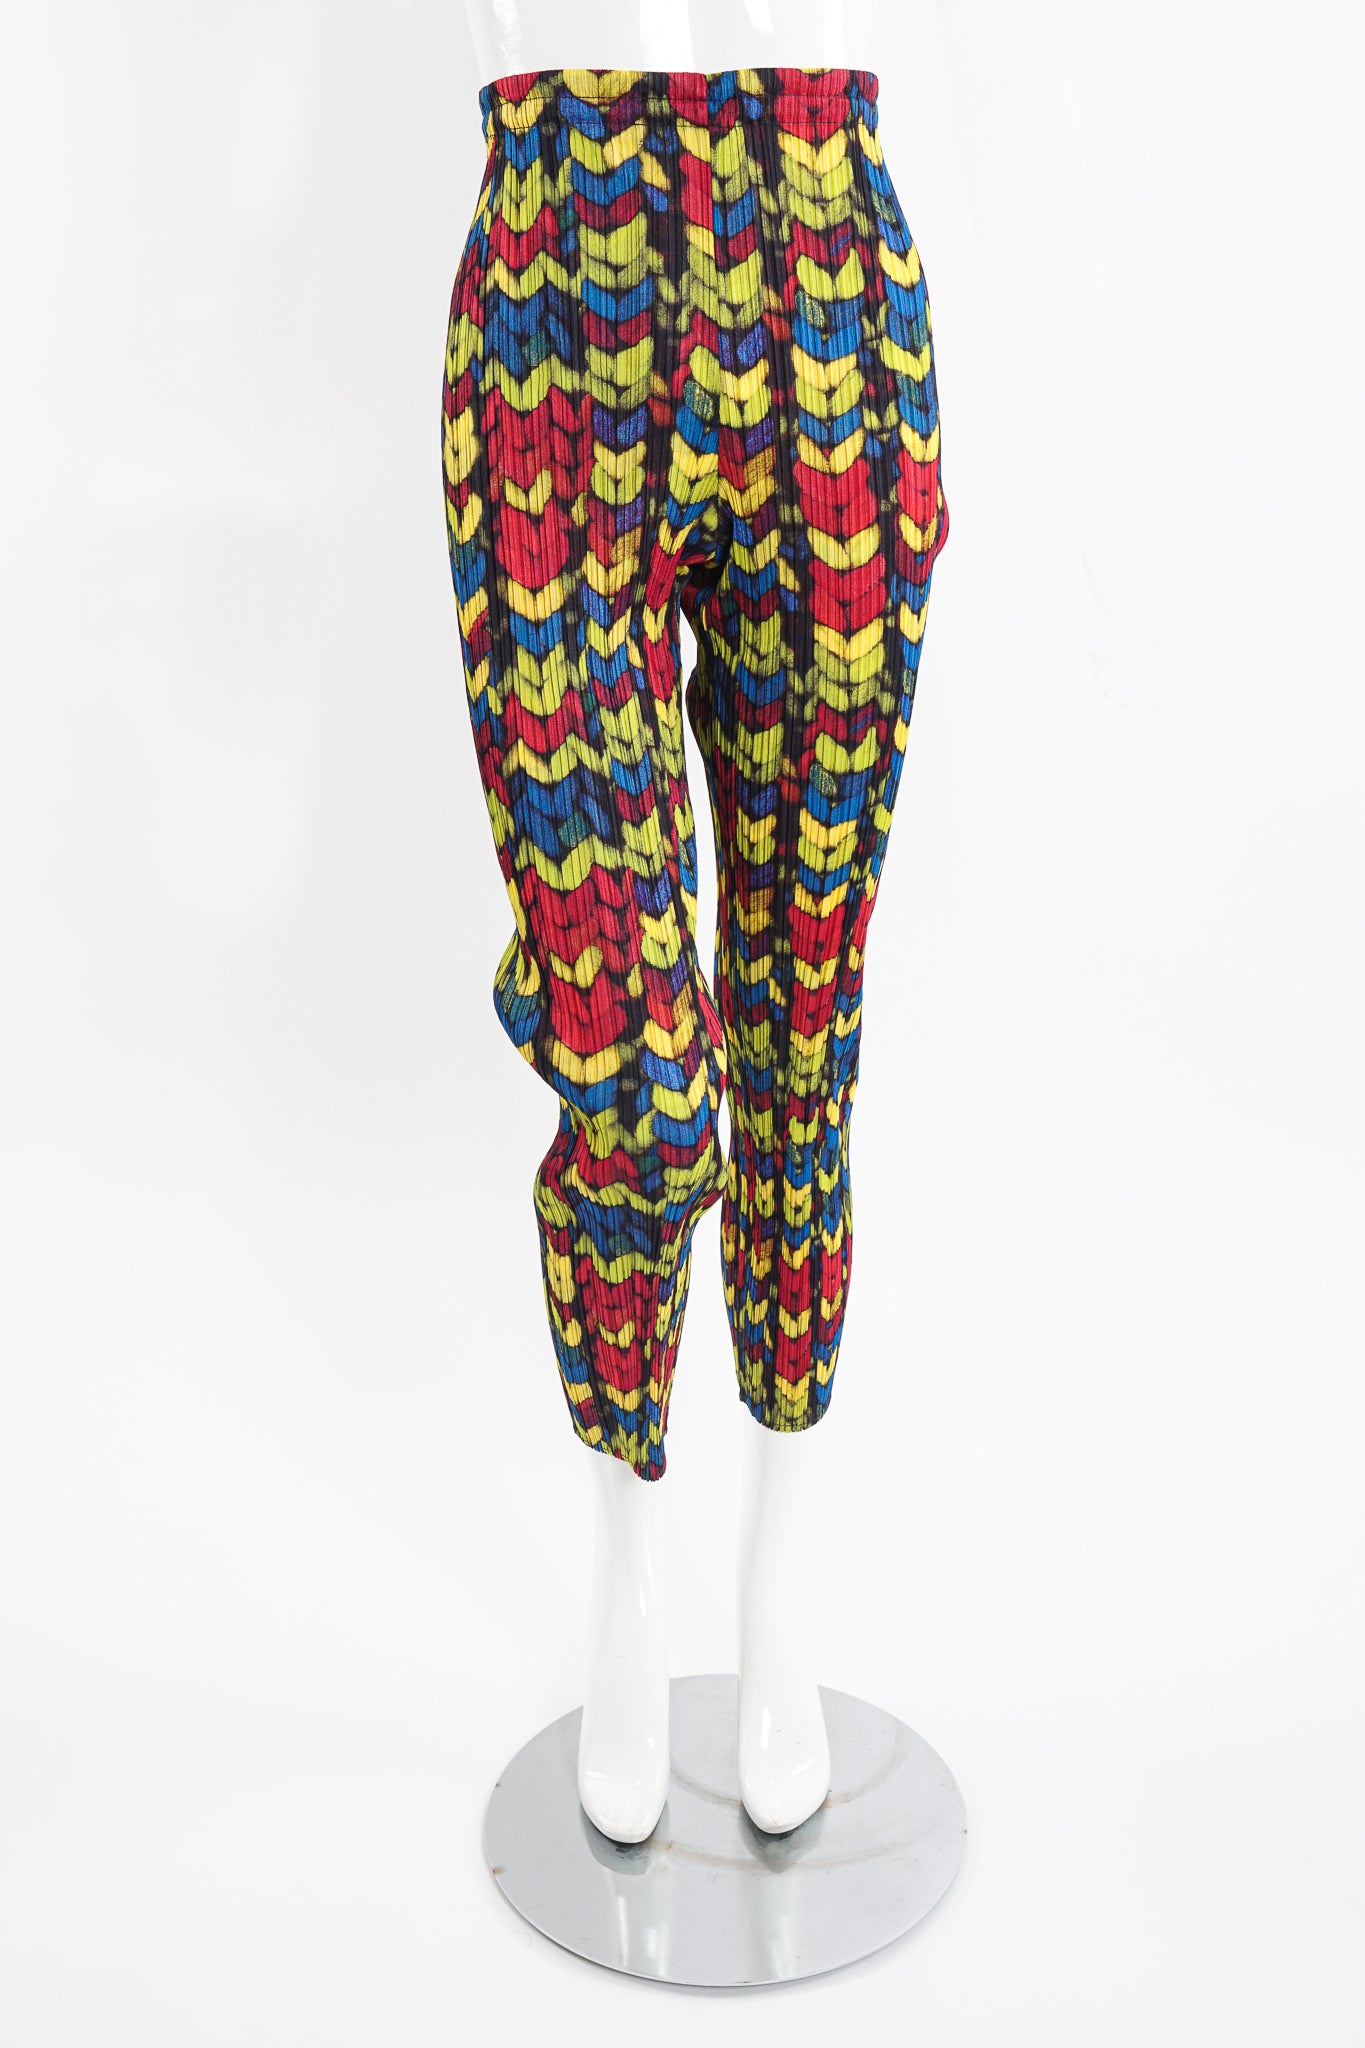 Vintage Issey Miyake Pleats Please RGB Yarn Print Pleated Pant on Mannequin Front at Recess LA